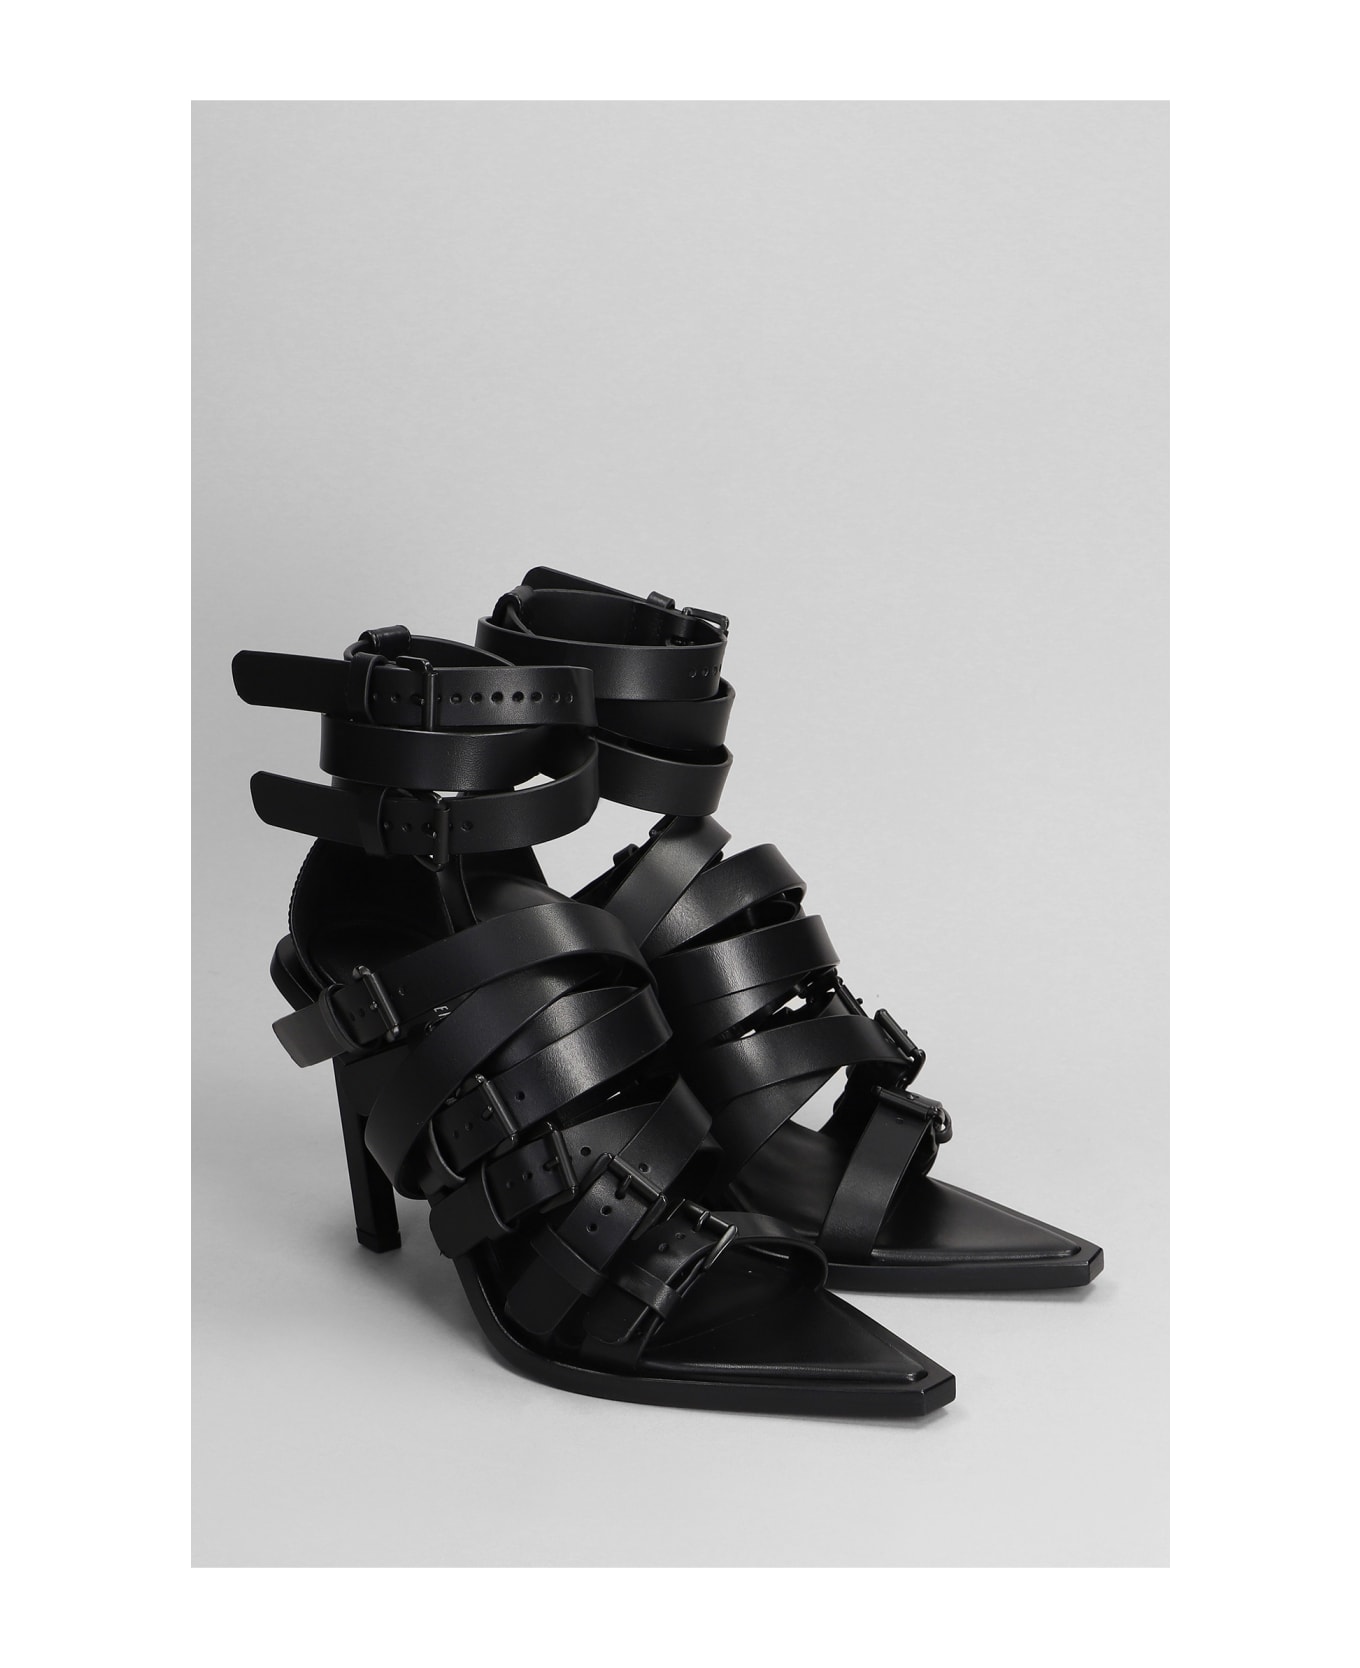 Ann Demeulemeester Sandals In Black Leather - black サンダル